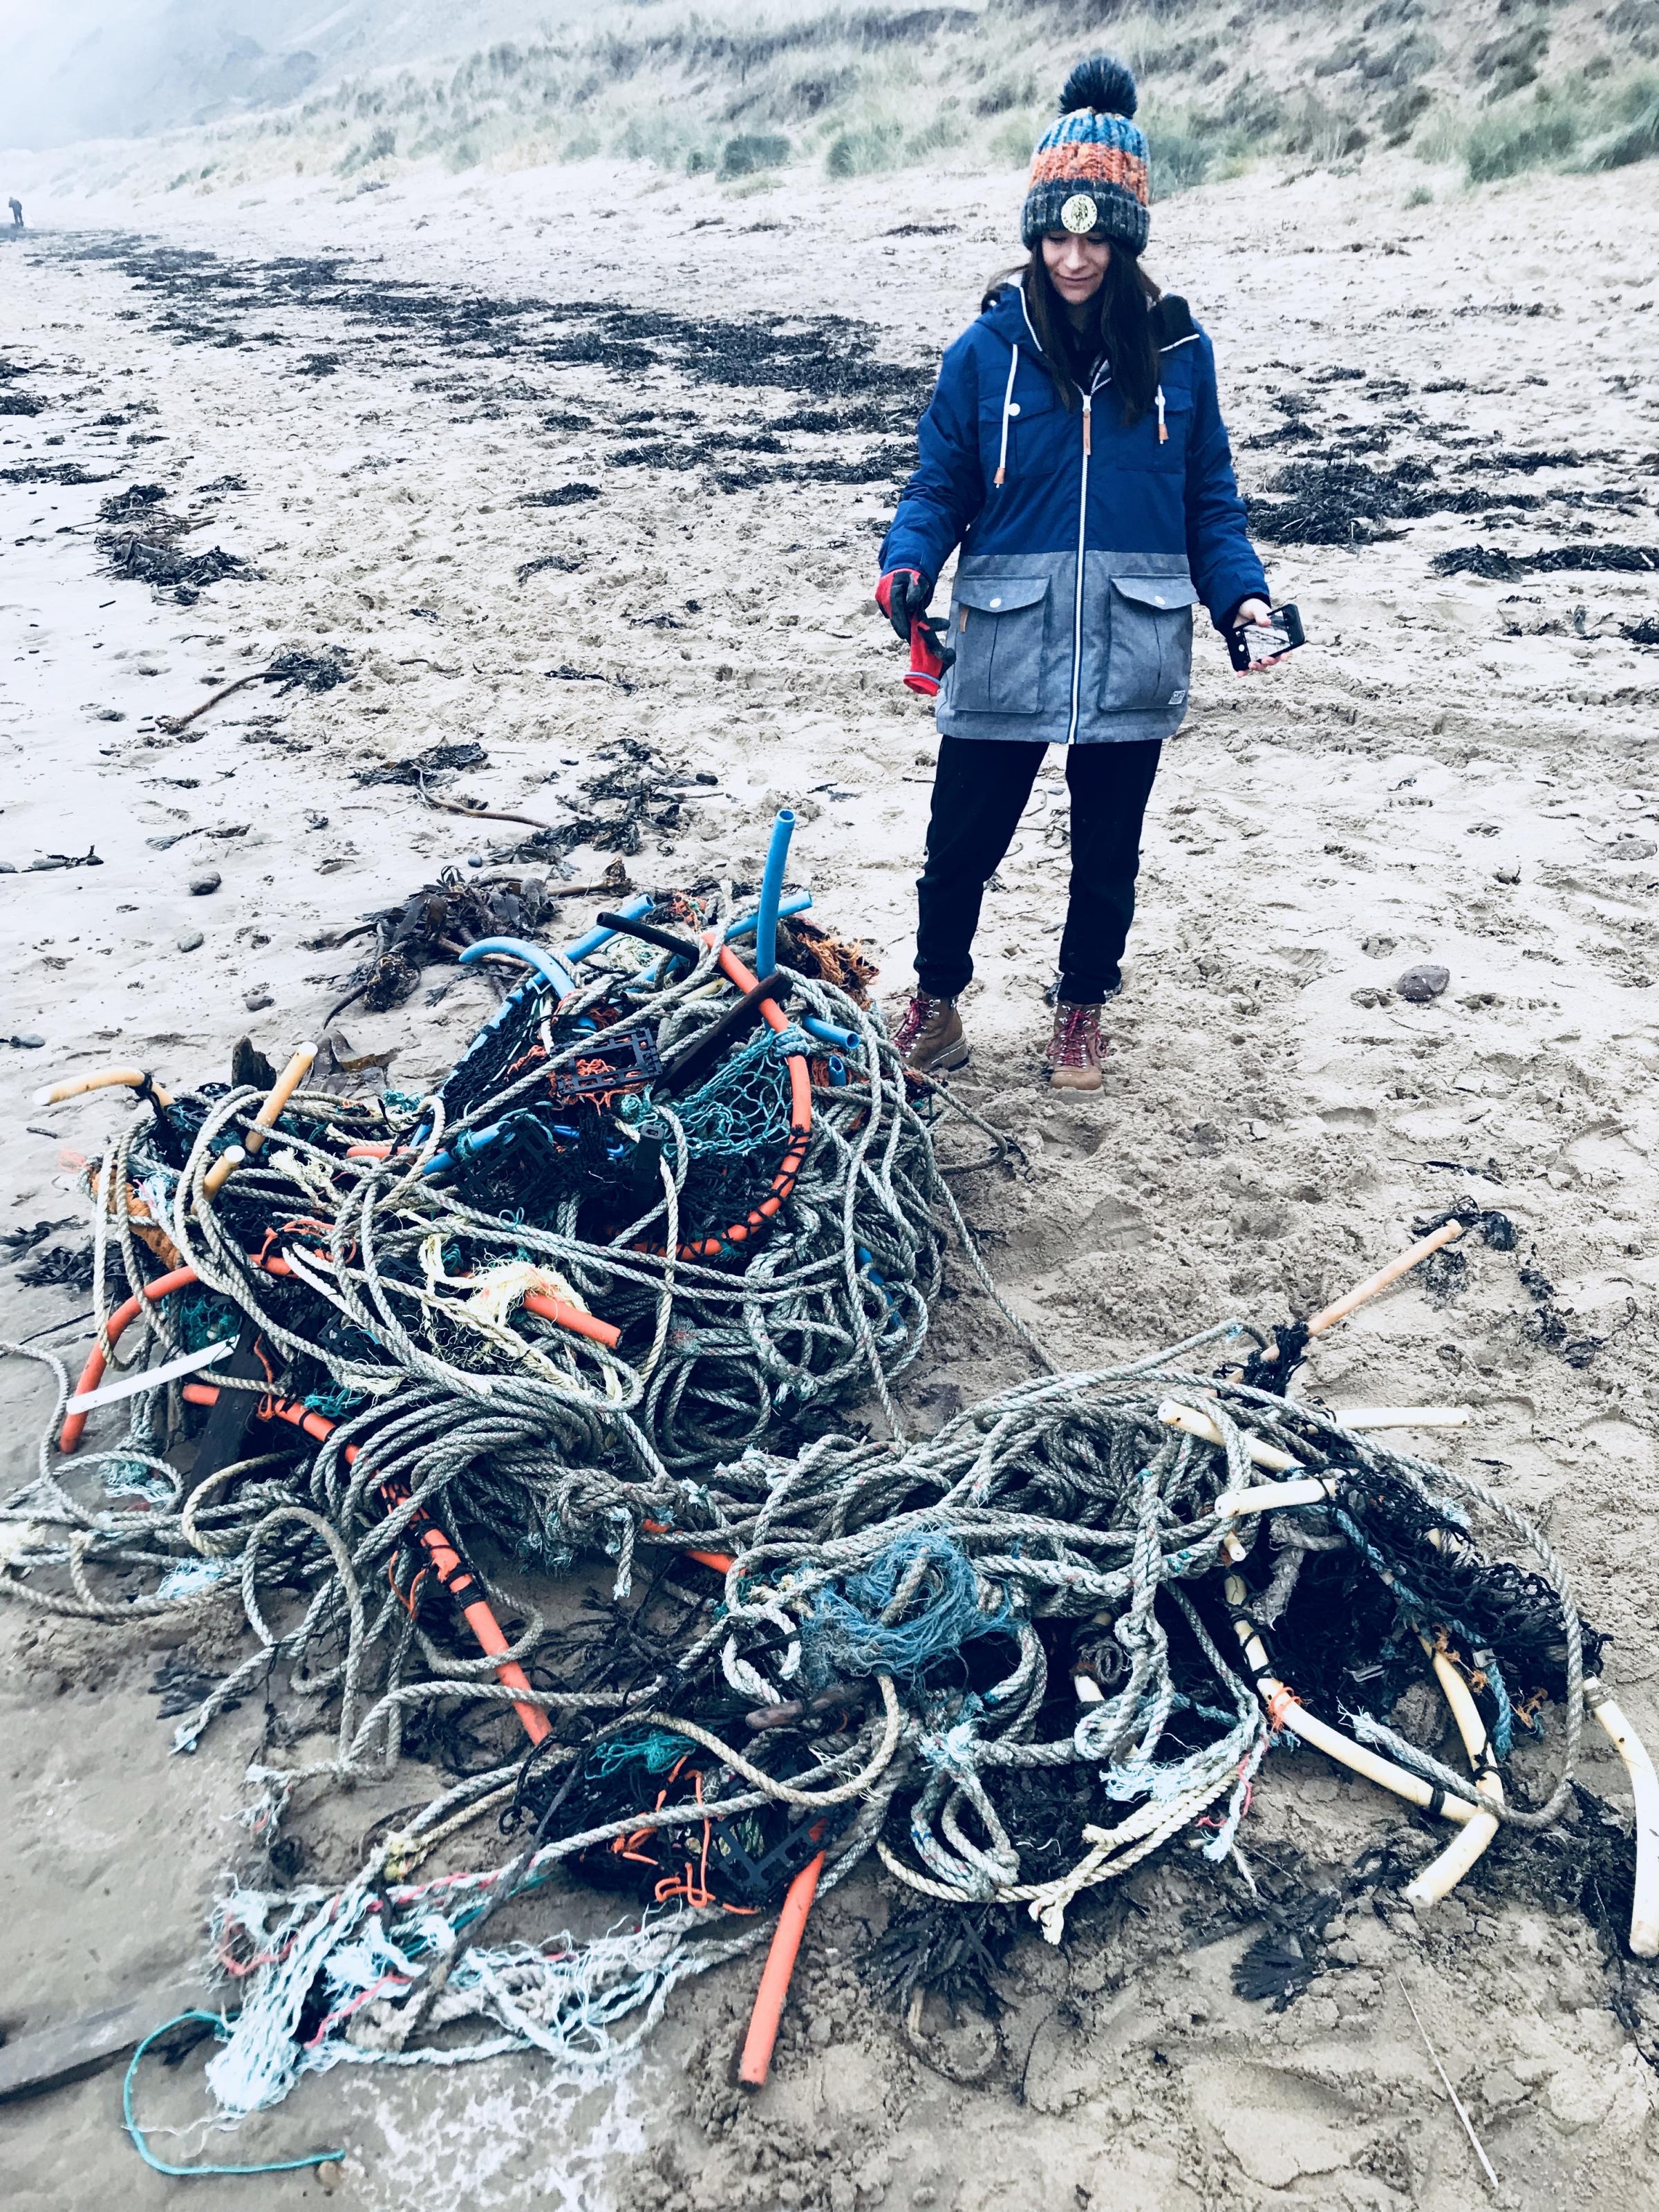 Kirsty Wood, 31, says living by the coast really cements her connection to the environment